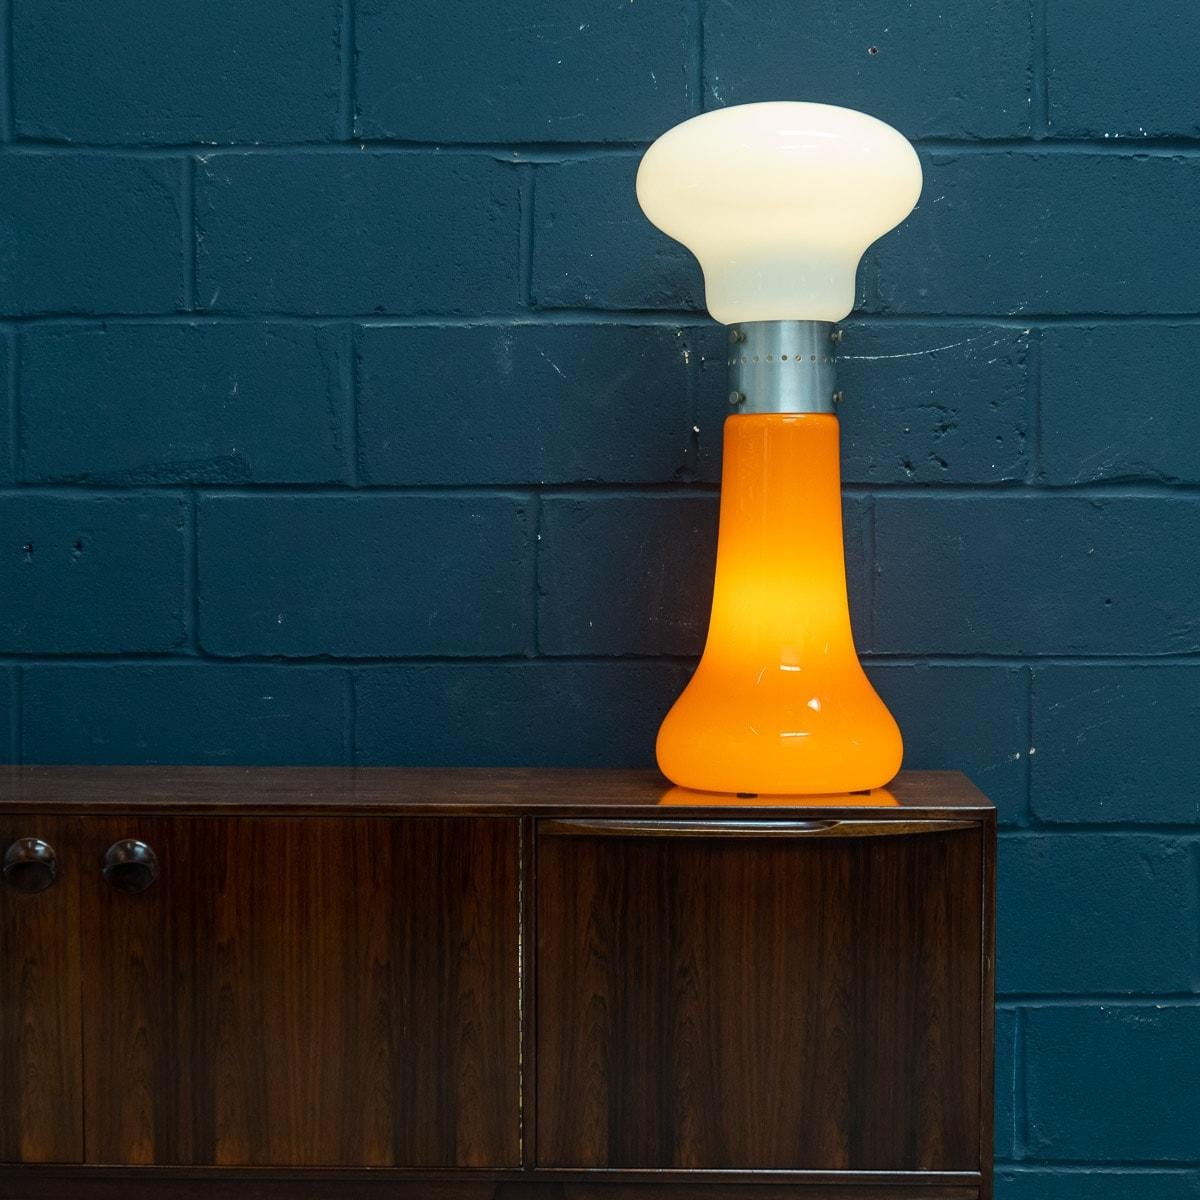 A superb vintage Italian table lamp made by Carlo Nason for Mazzega. Produced in Murano, Venice in the 1970s, this chrome and glass lamp exemplifies Carlo Nason’s workmanship. Using vibrant colours, Nason has used a bright orange glass for the base